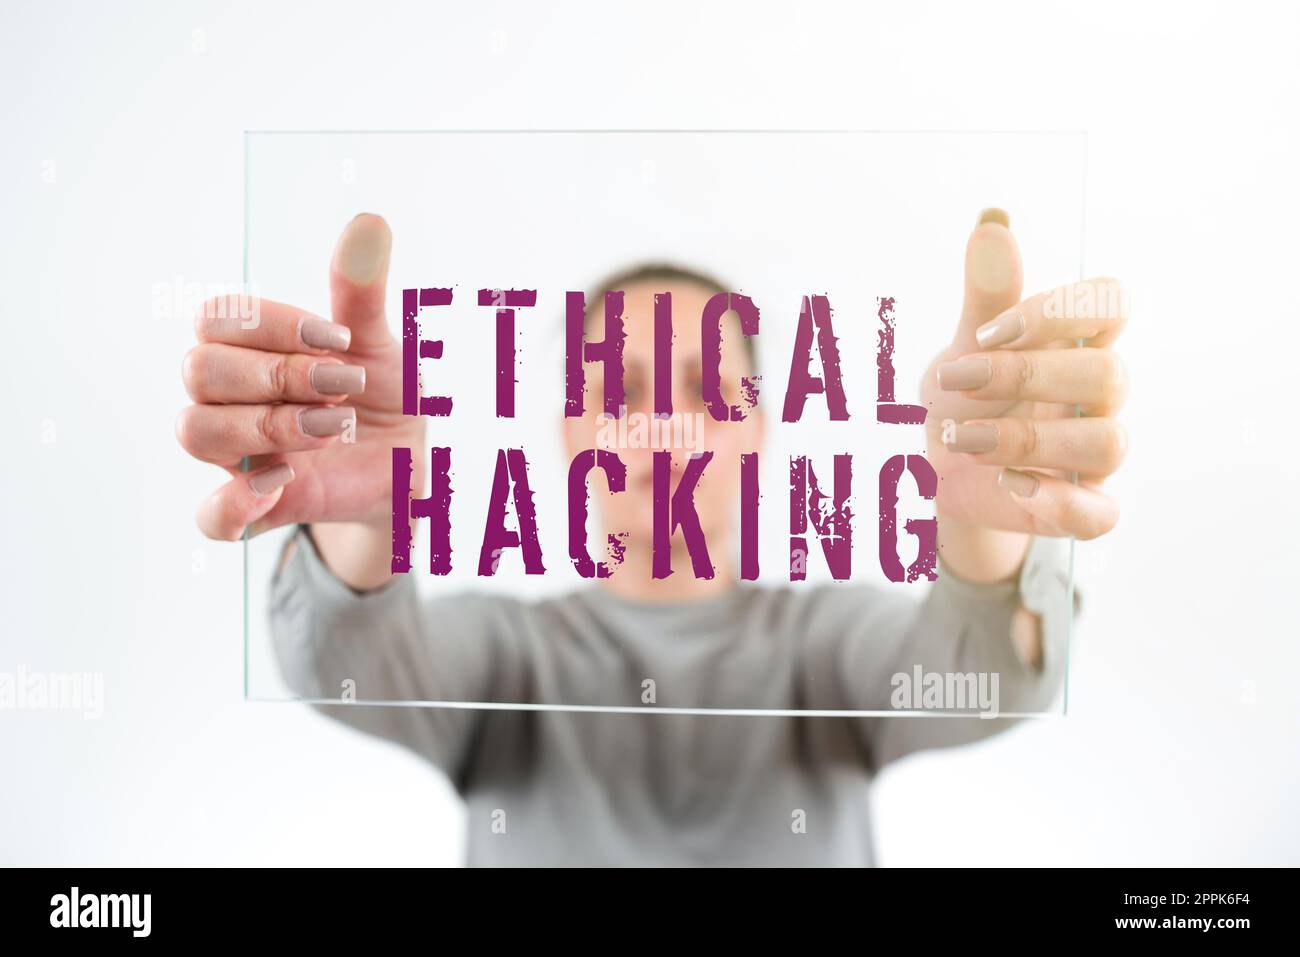 Conceptual caption Ethical Hacking. Business showcase a legal attempt of cracking a network for penetration testing Stock Photo